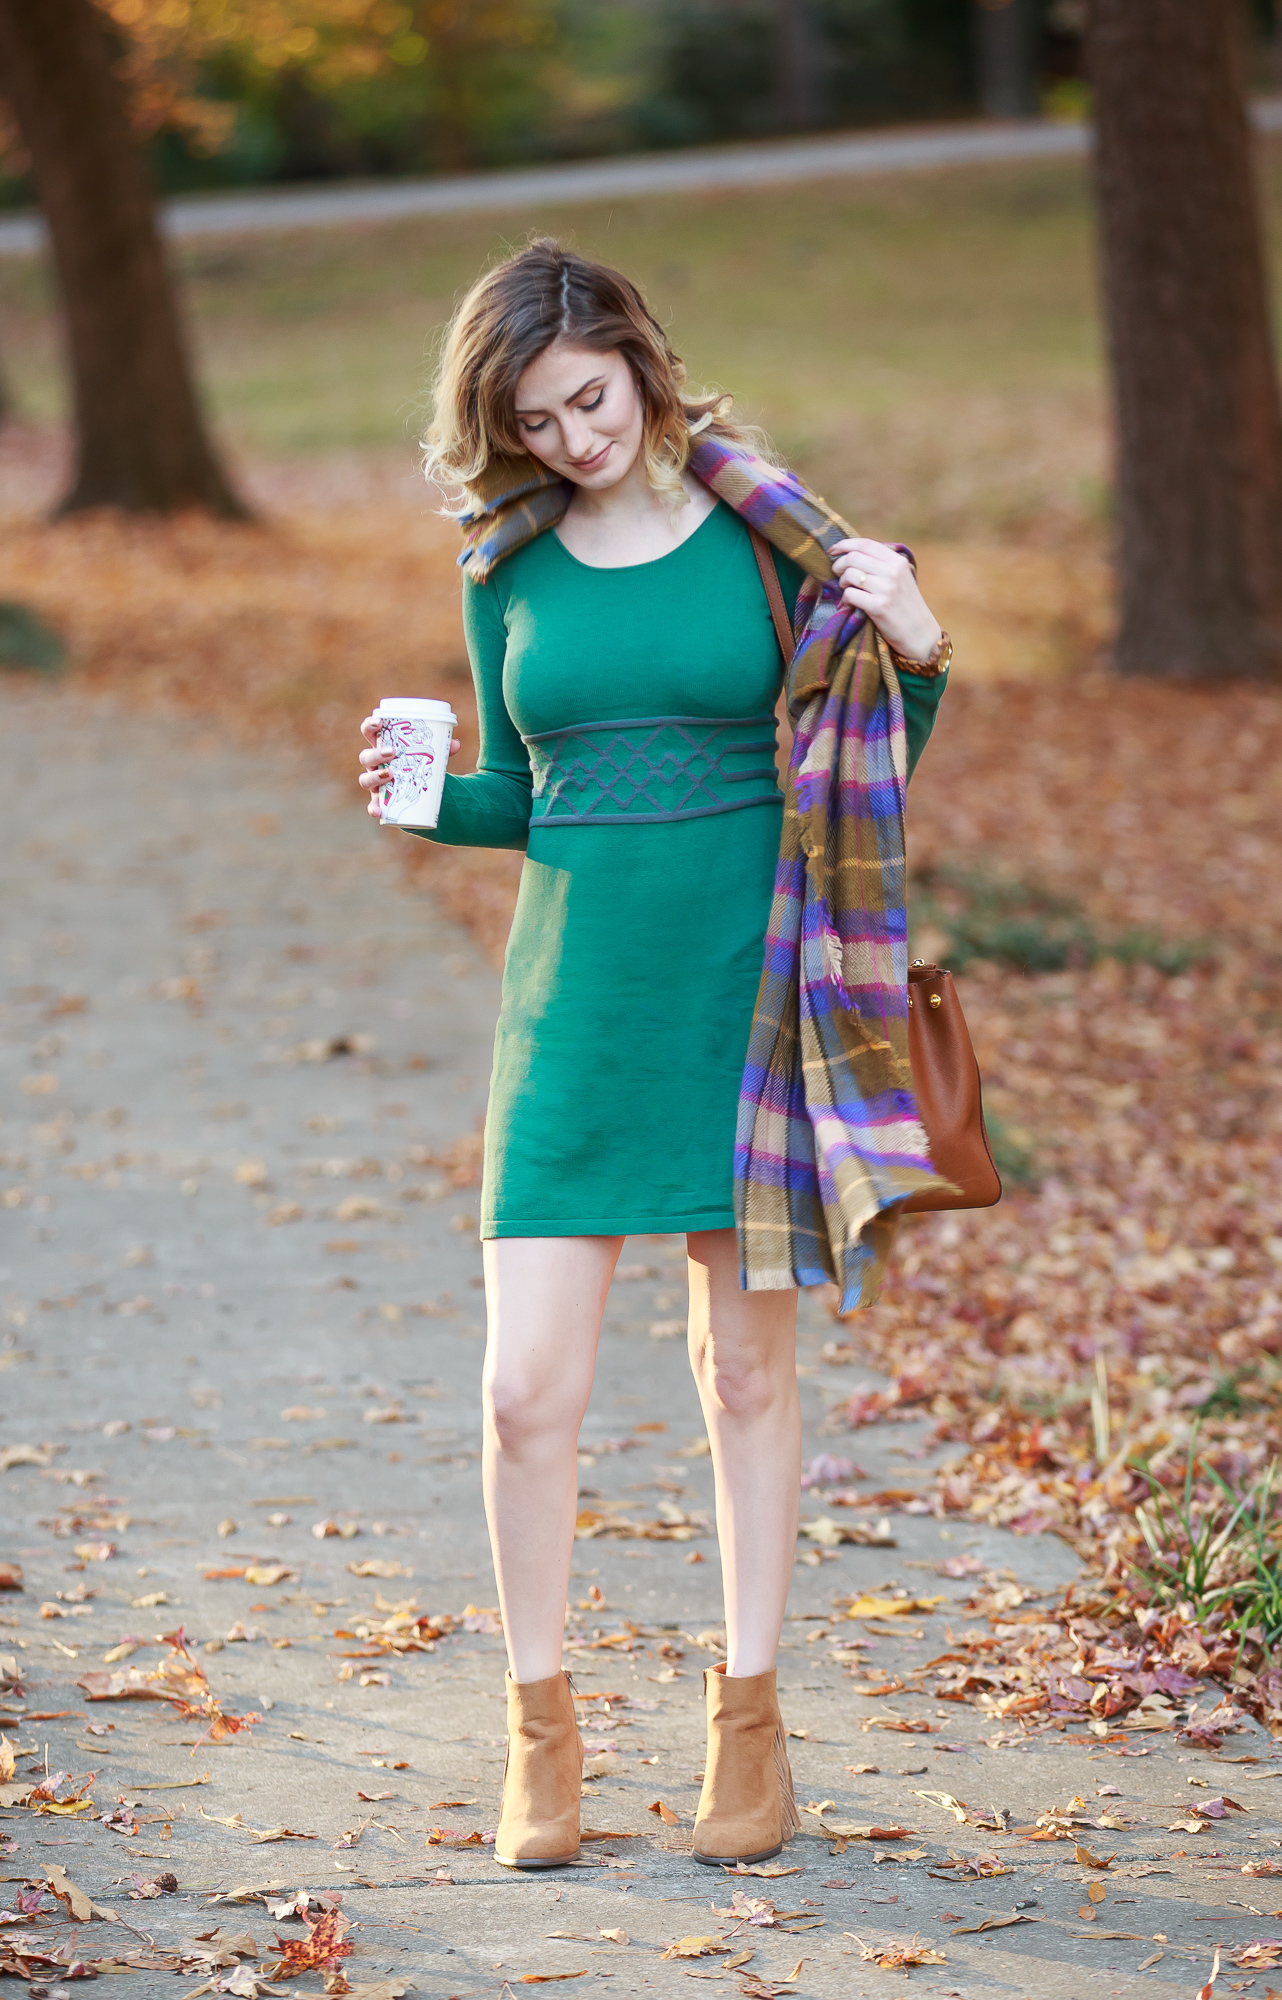 North Carolina fashion and lifestyle blogger Jessica Linn wearing a sweater dress from Aventura. Aventura clothes are made from organic sustainable materials promoting sustainable fashion. Also wearing fringe booties from Forever21, a green plaid scarf from Target, and a Michael Kors purse and a JORD wood watch.